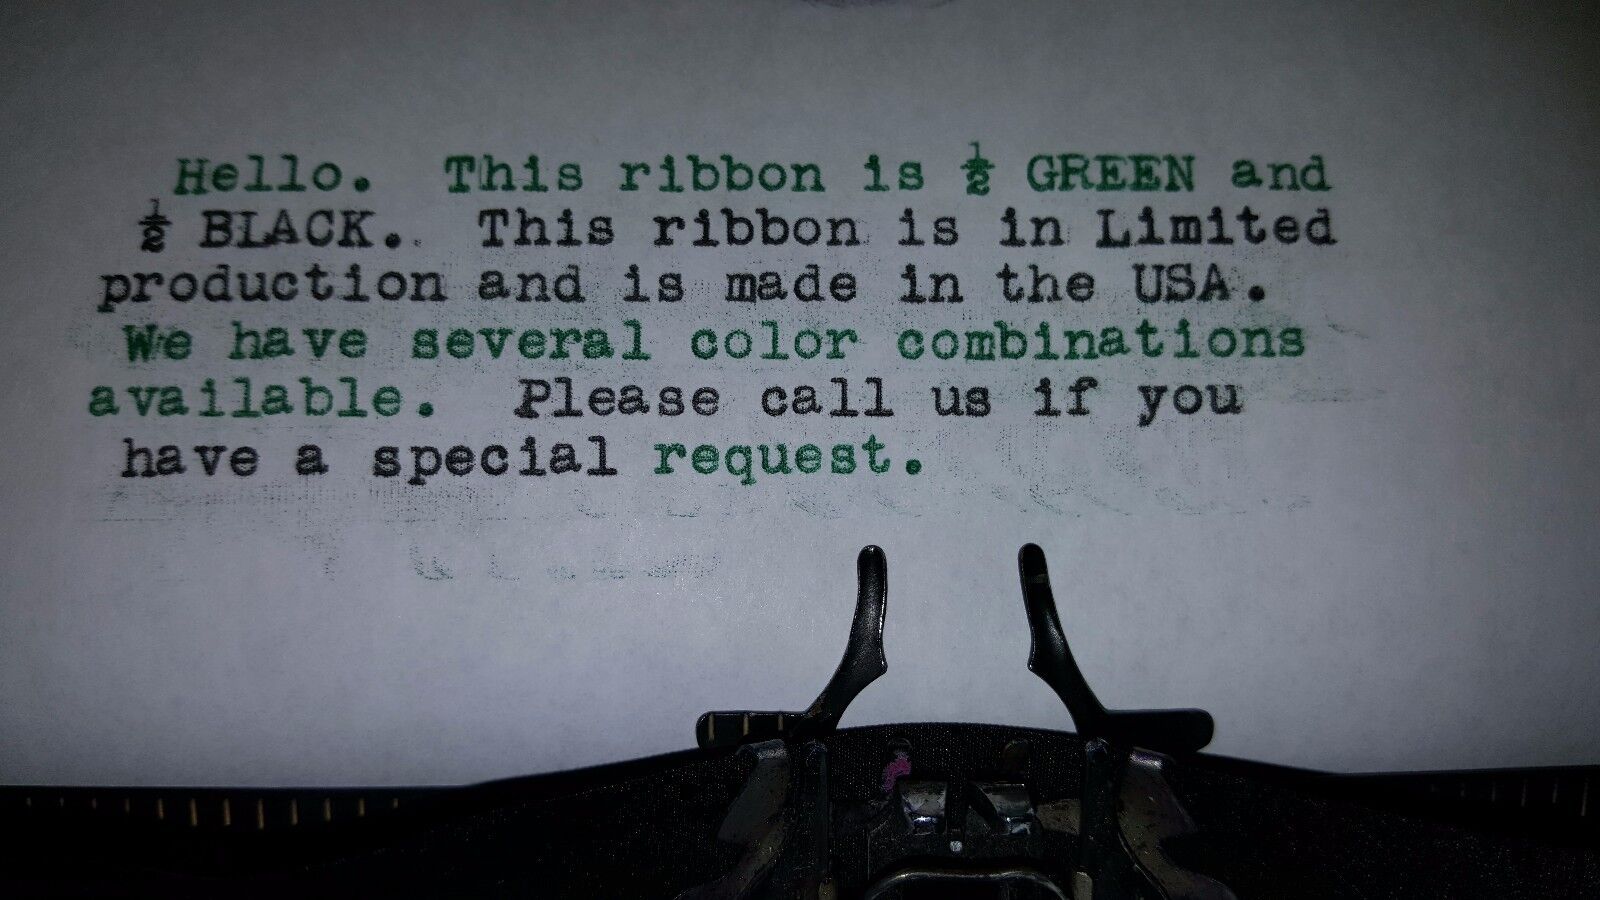 Royal Quiet De Luxe Typewriter Ribbon - Black and Green Ink Ribbon Made in USA